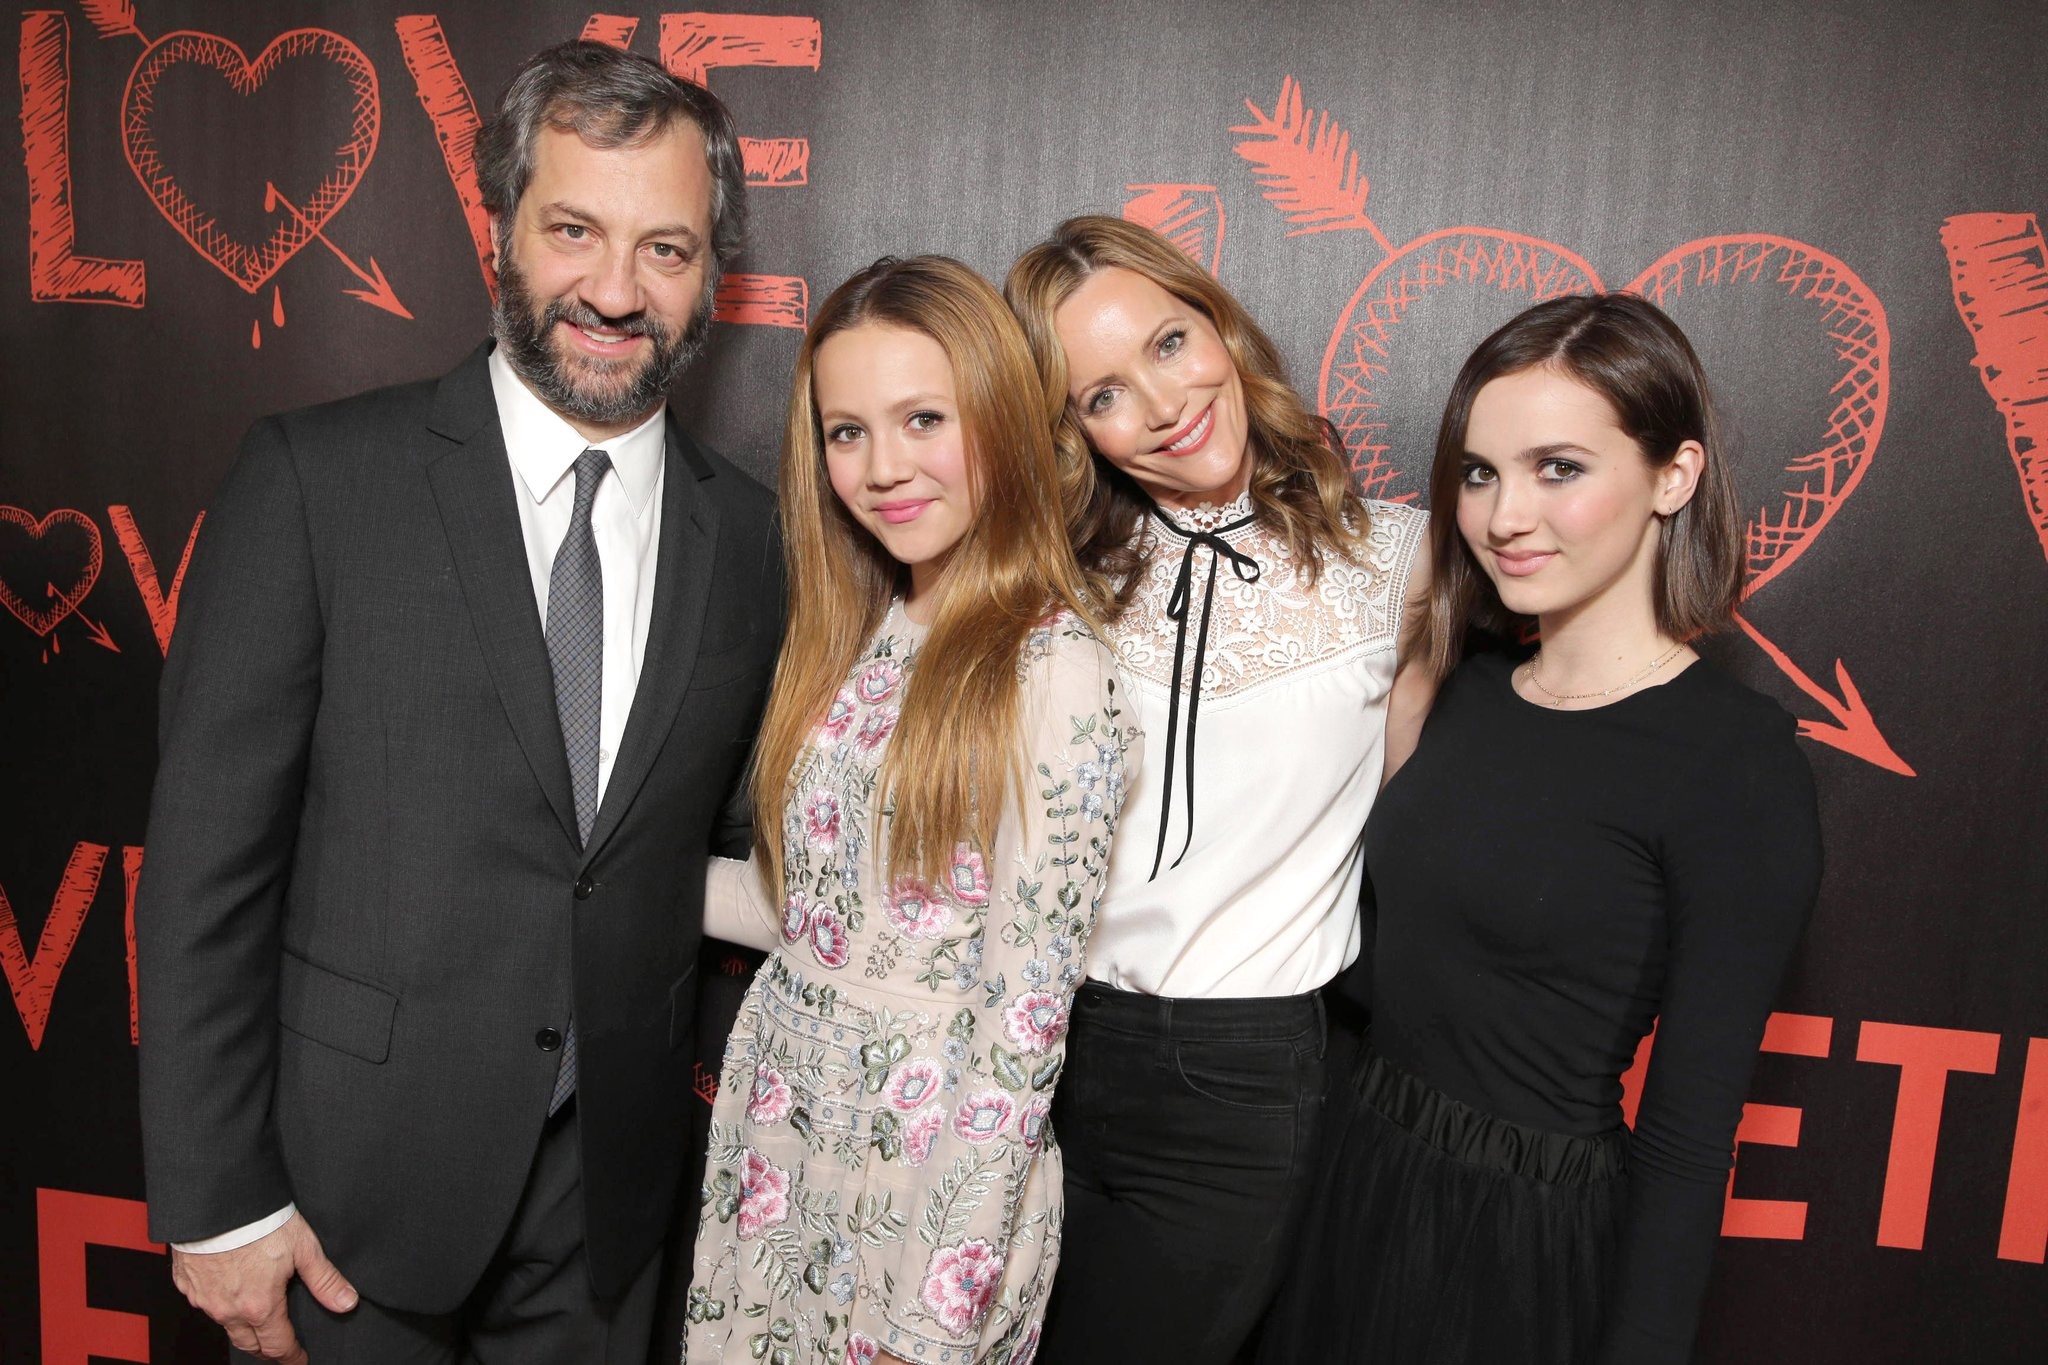 2048x1365 Judd Apatow With Leslie Mann and Daughters at Love Premiere | POPSUGAR  Celebrity